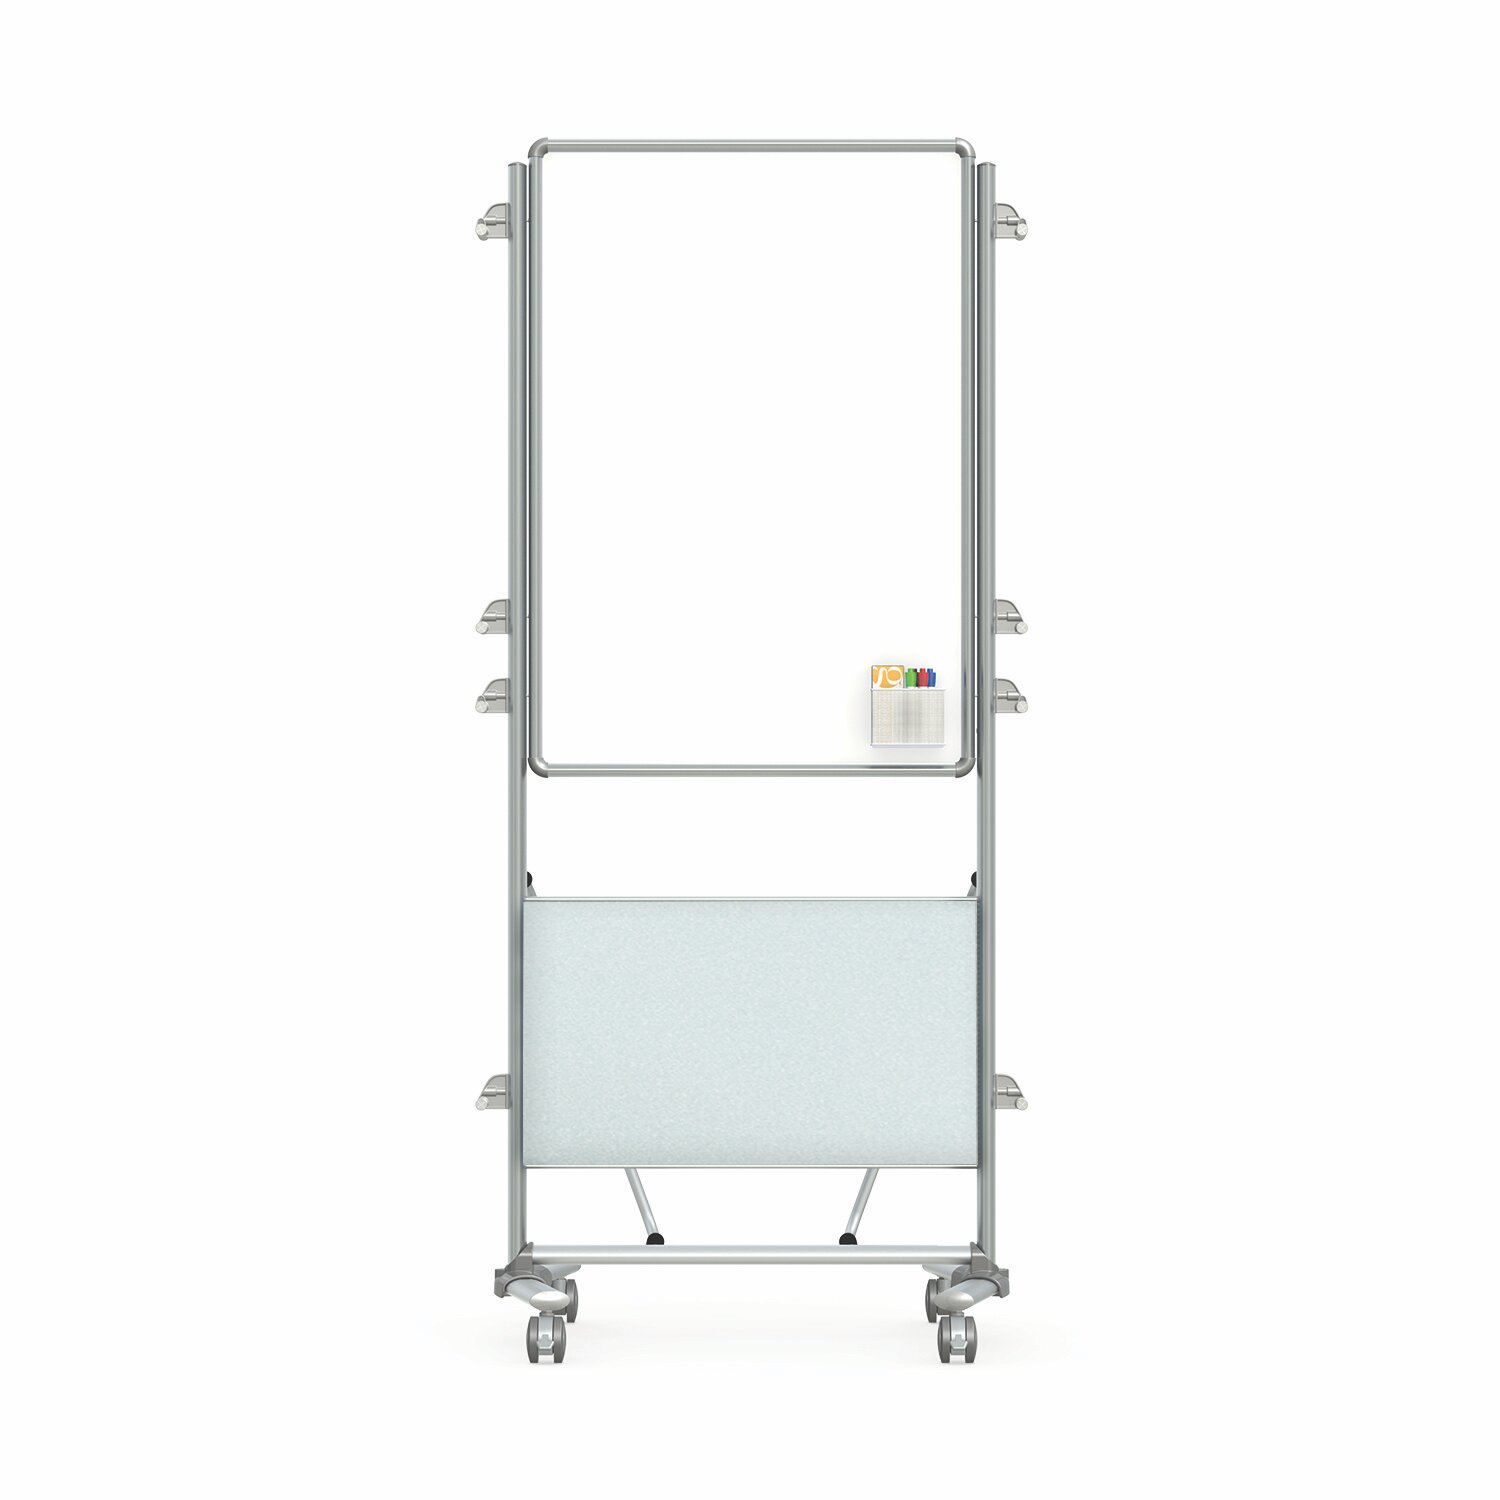 Ghent Nexus Easel+, Mobile 2-Sided Porcelain Magnetic Whiteboard with  Tablet Storage | Wayfair